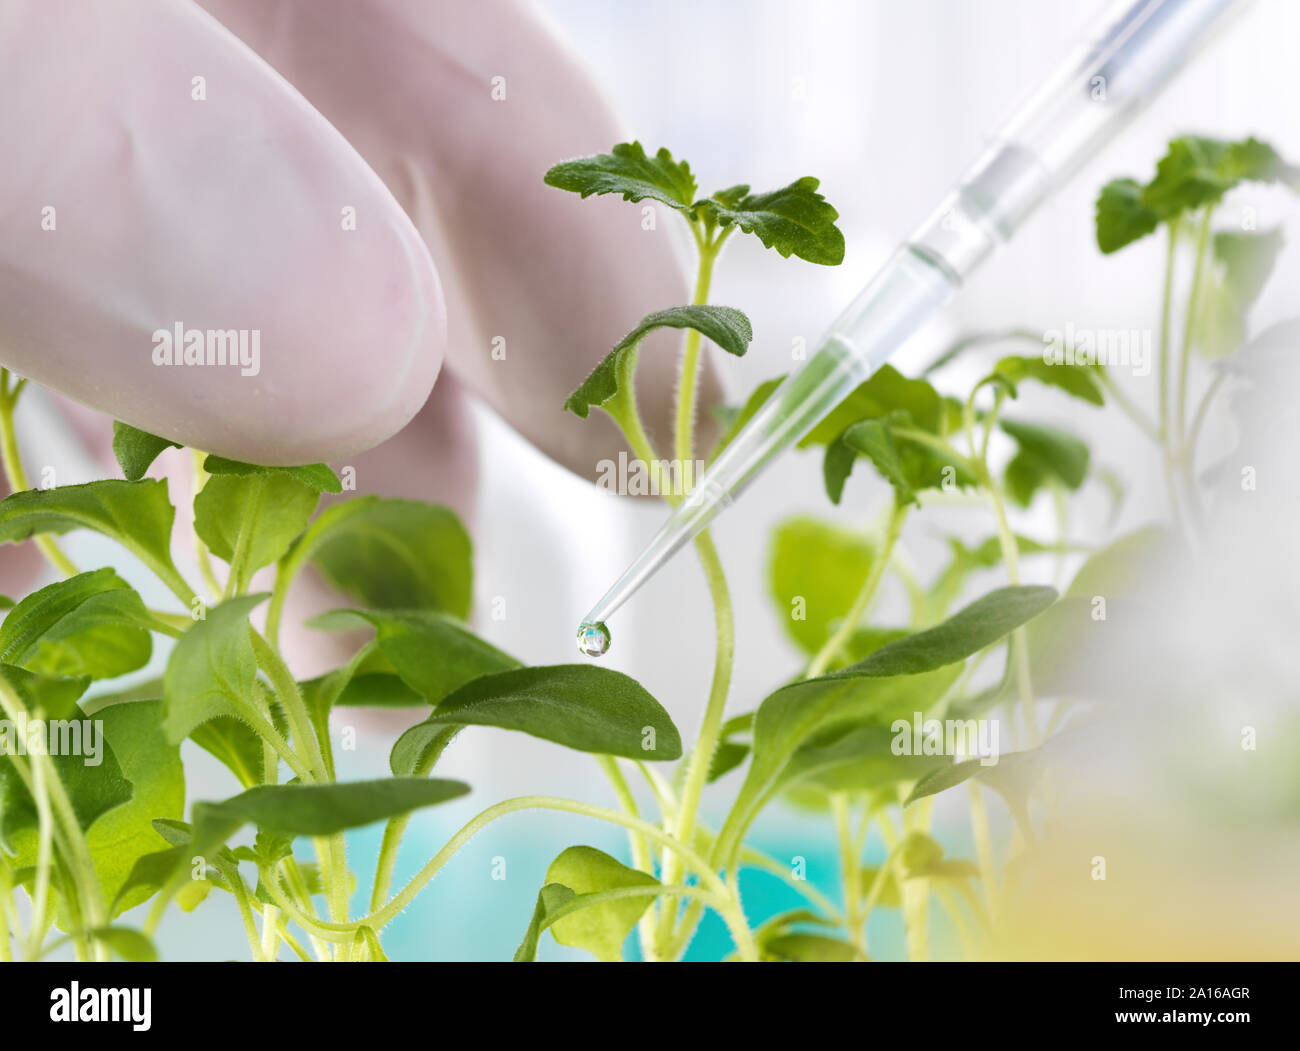 Scientist pipetting sample onto a seedling Stock Photo